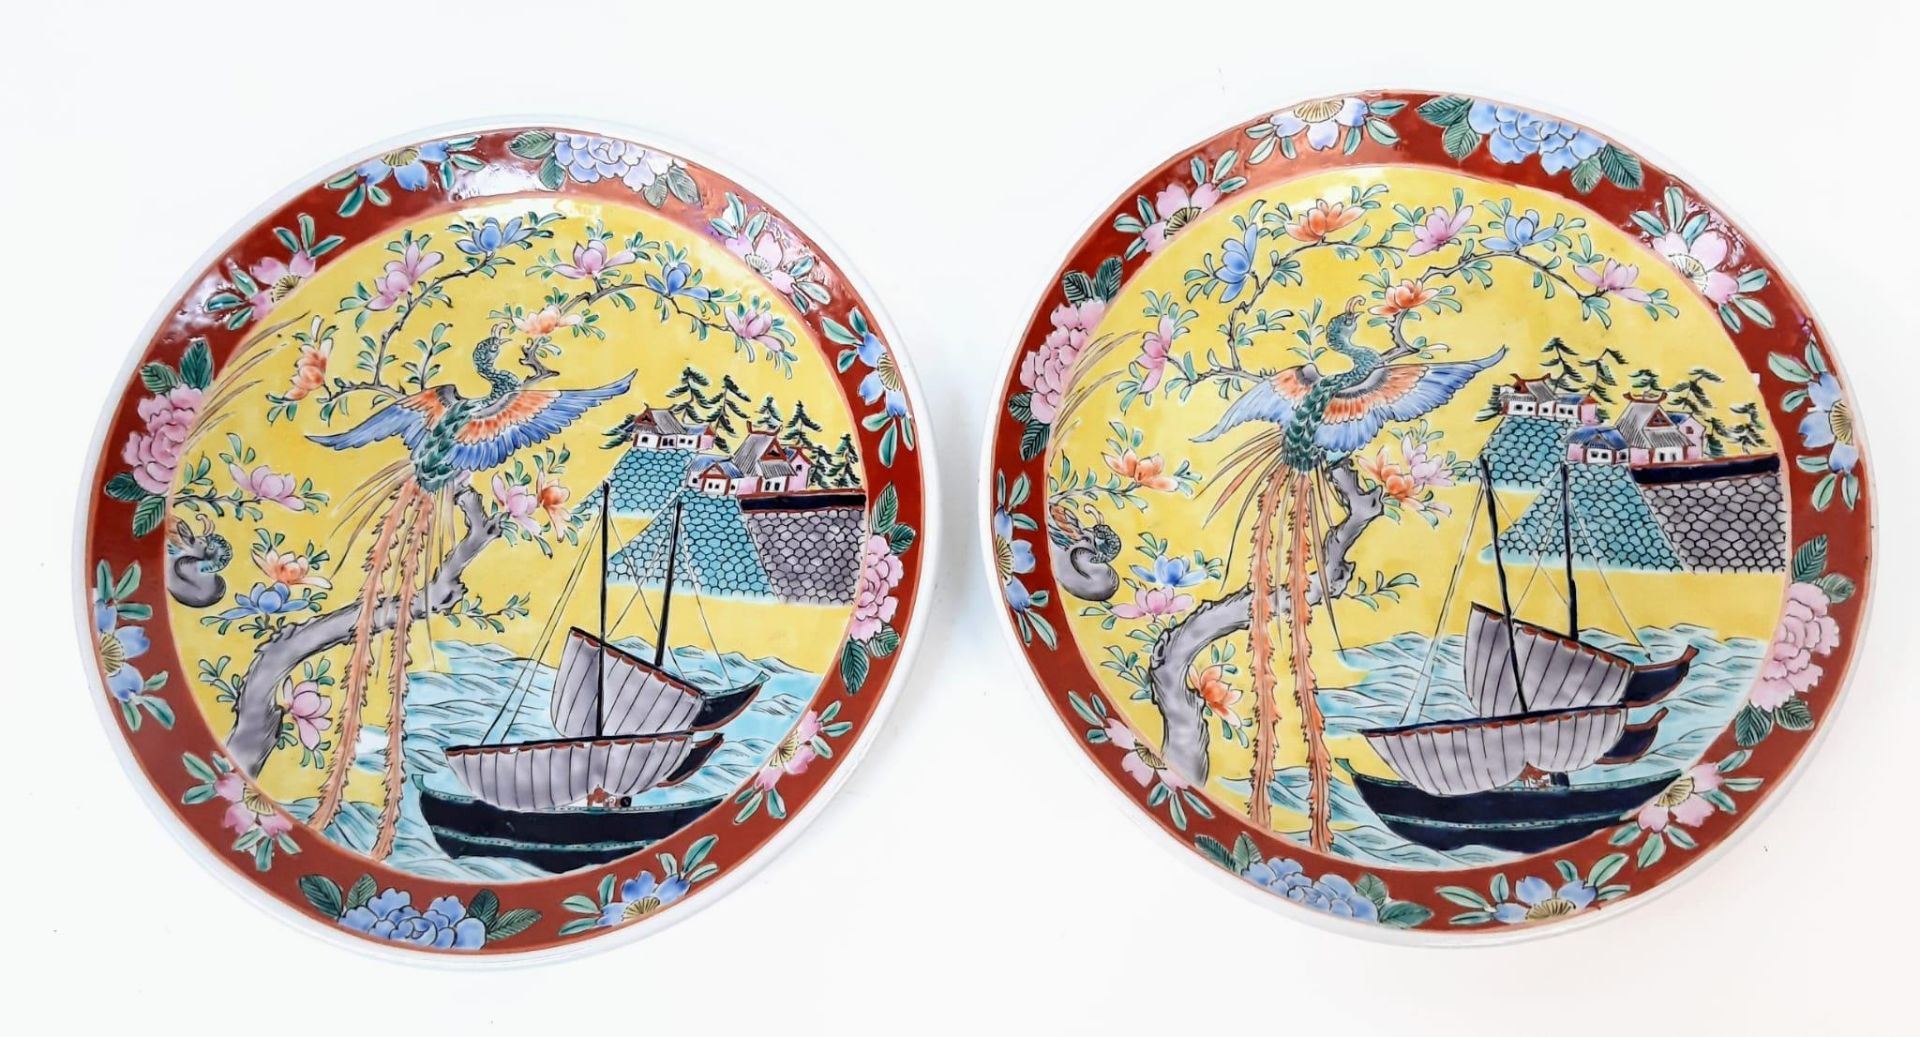 A pair of large, wonderful Chinese Famille Jaune enamelled Plates. Depicting boats, houses and